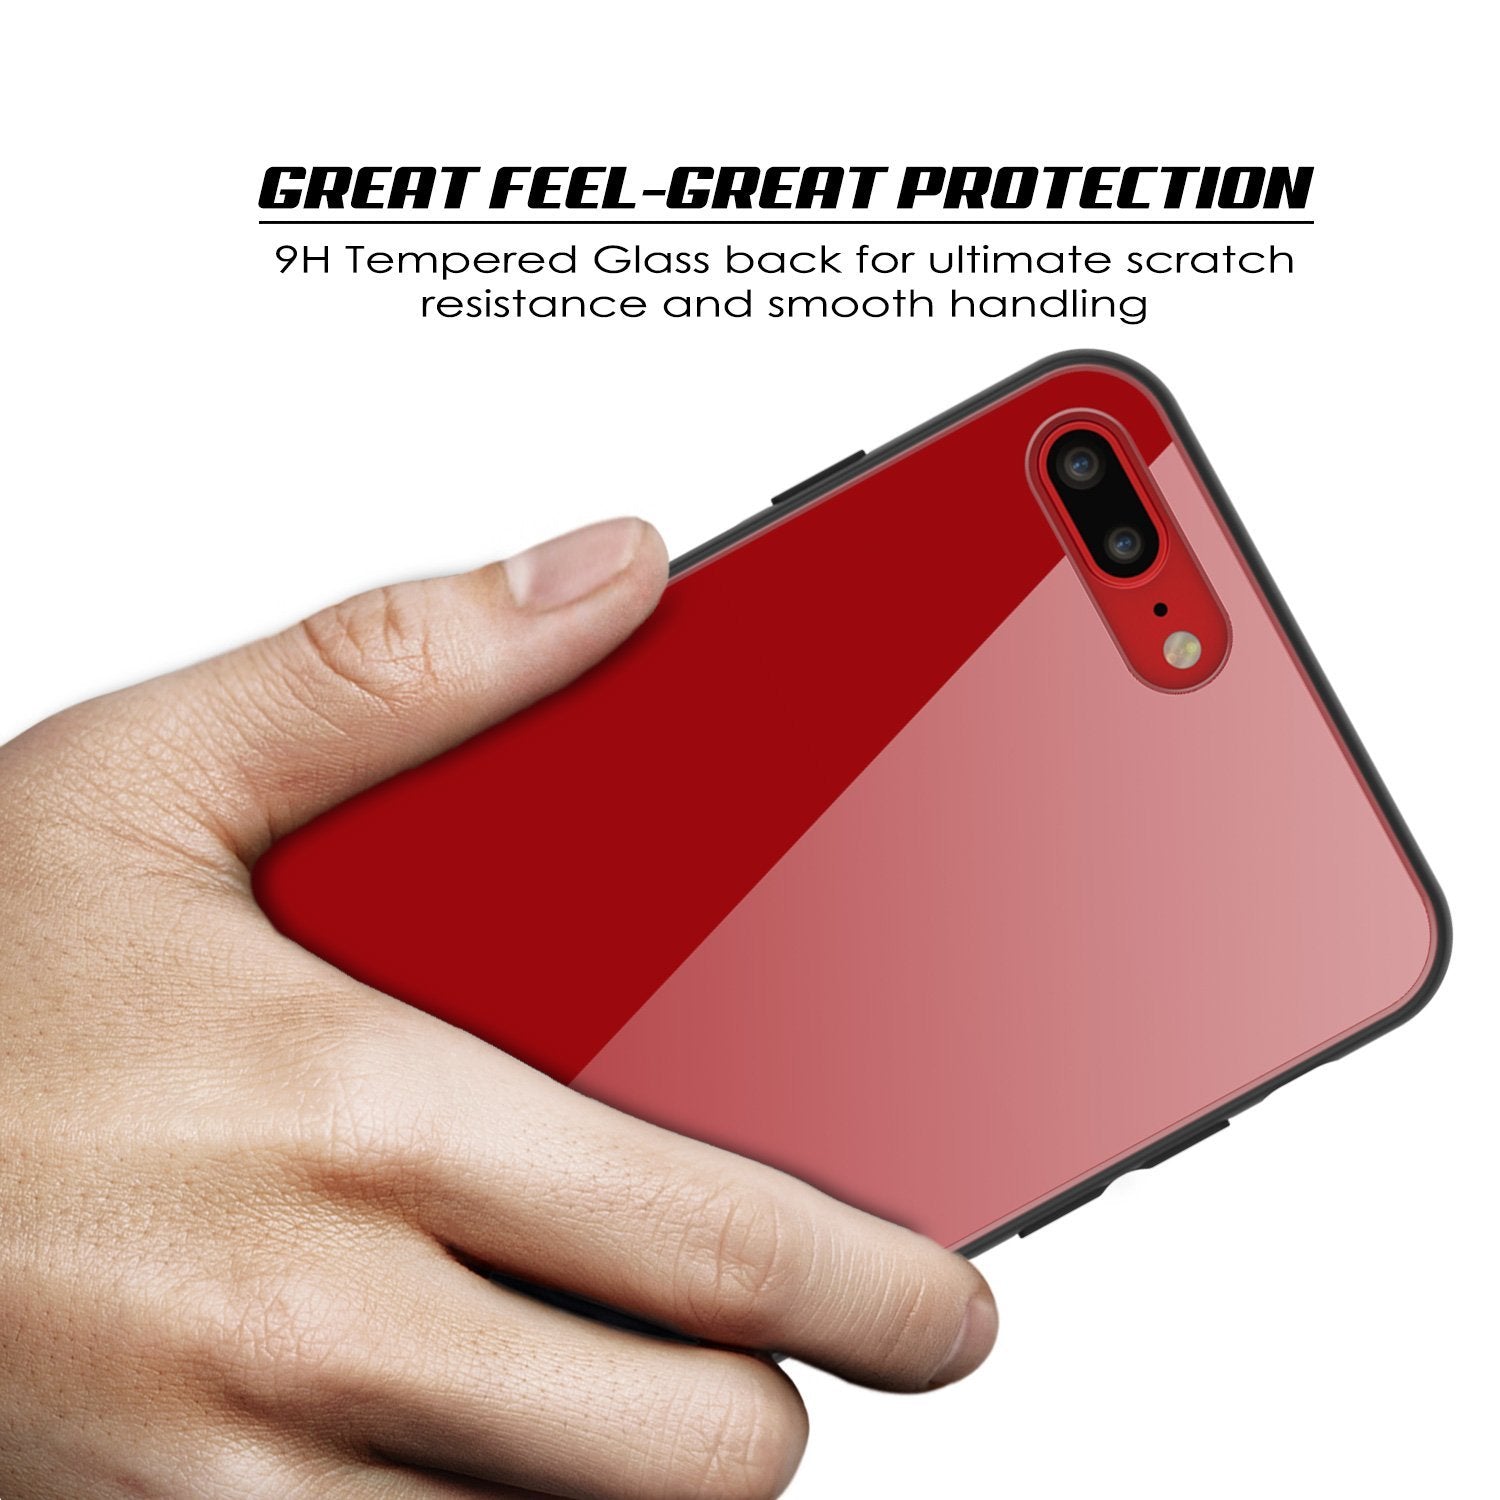 iPhone 8 PLUS Case, Punkcase GlassShield Ultra Thin (Red)